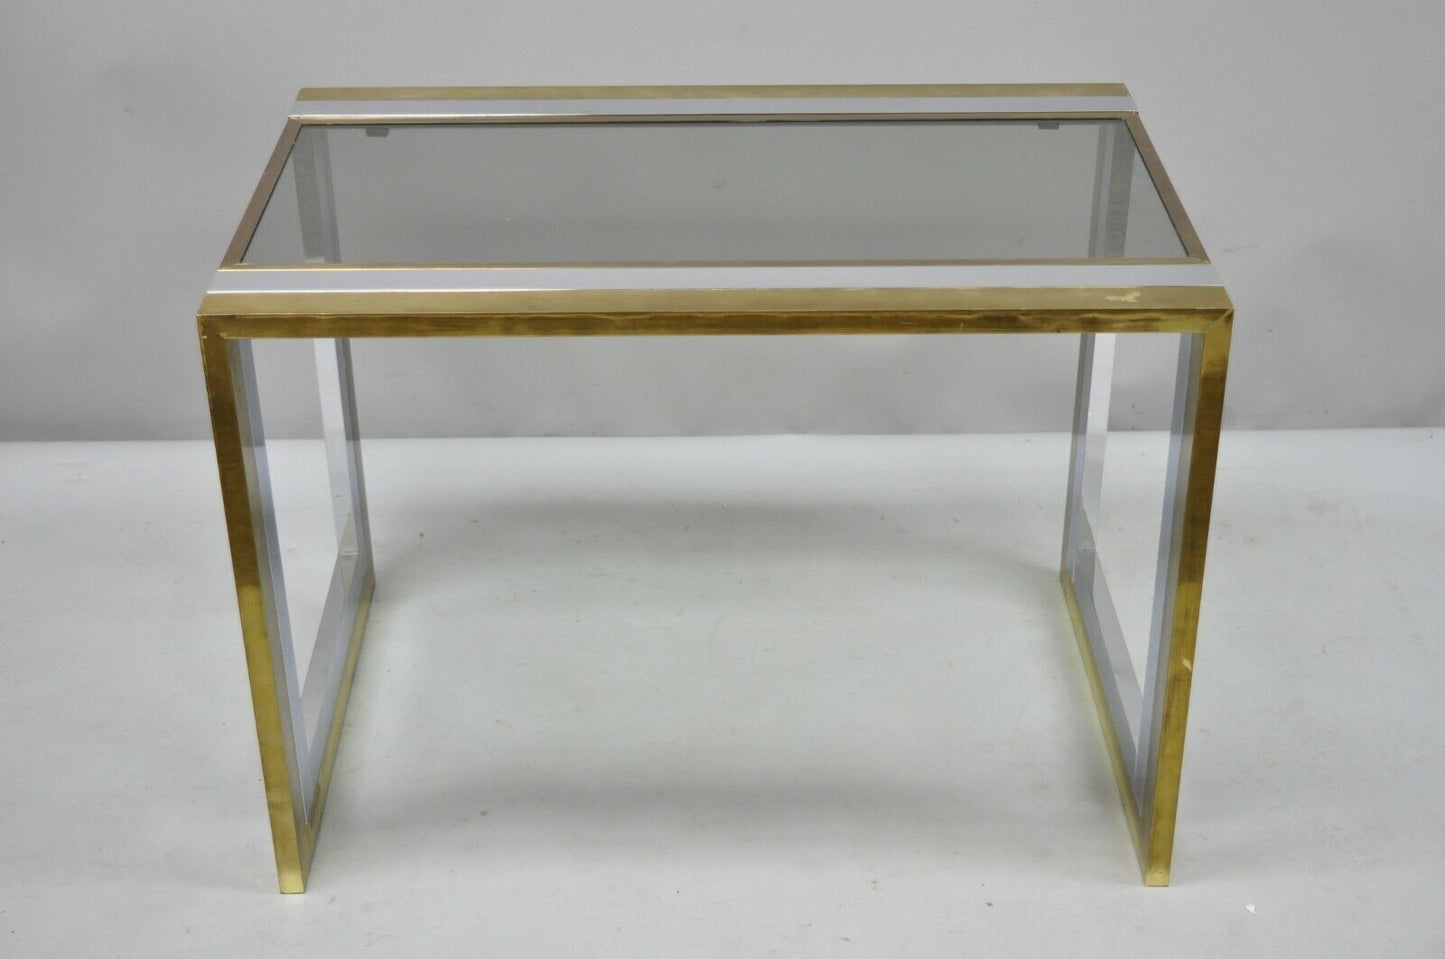 Vtg Mid Century Modern Chrome Brass Glass Waterfall Side Table by Messin Finland